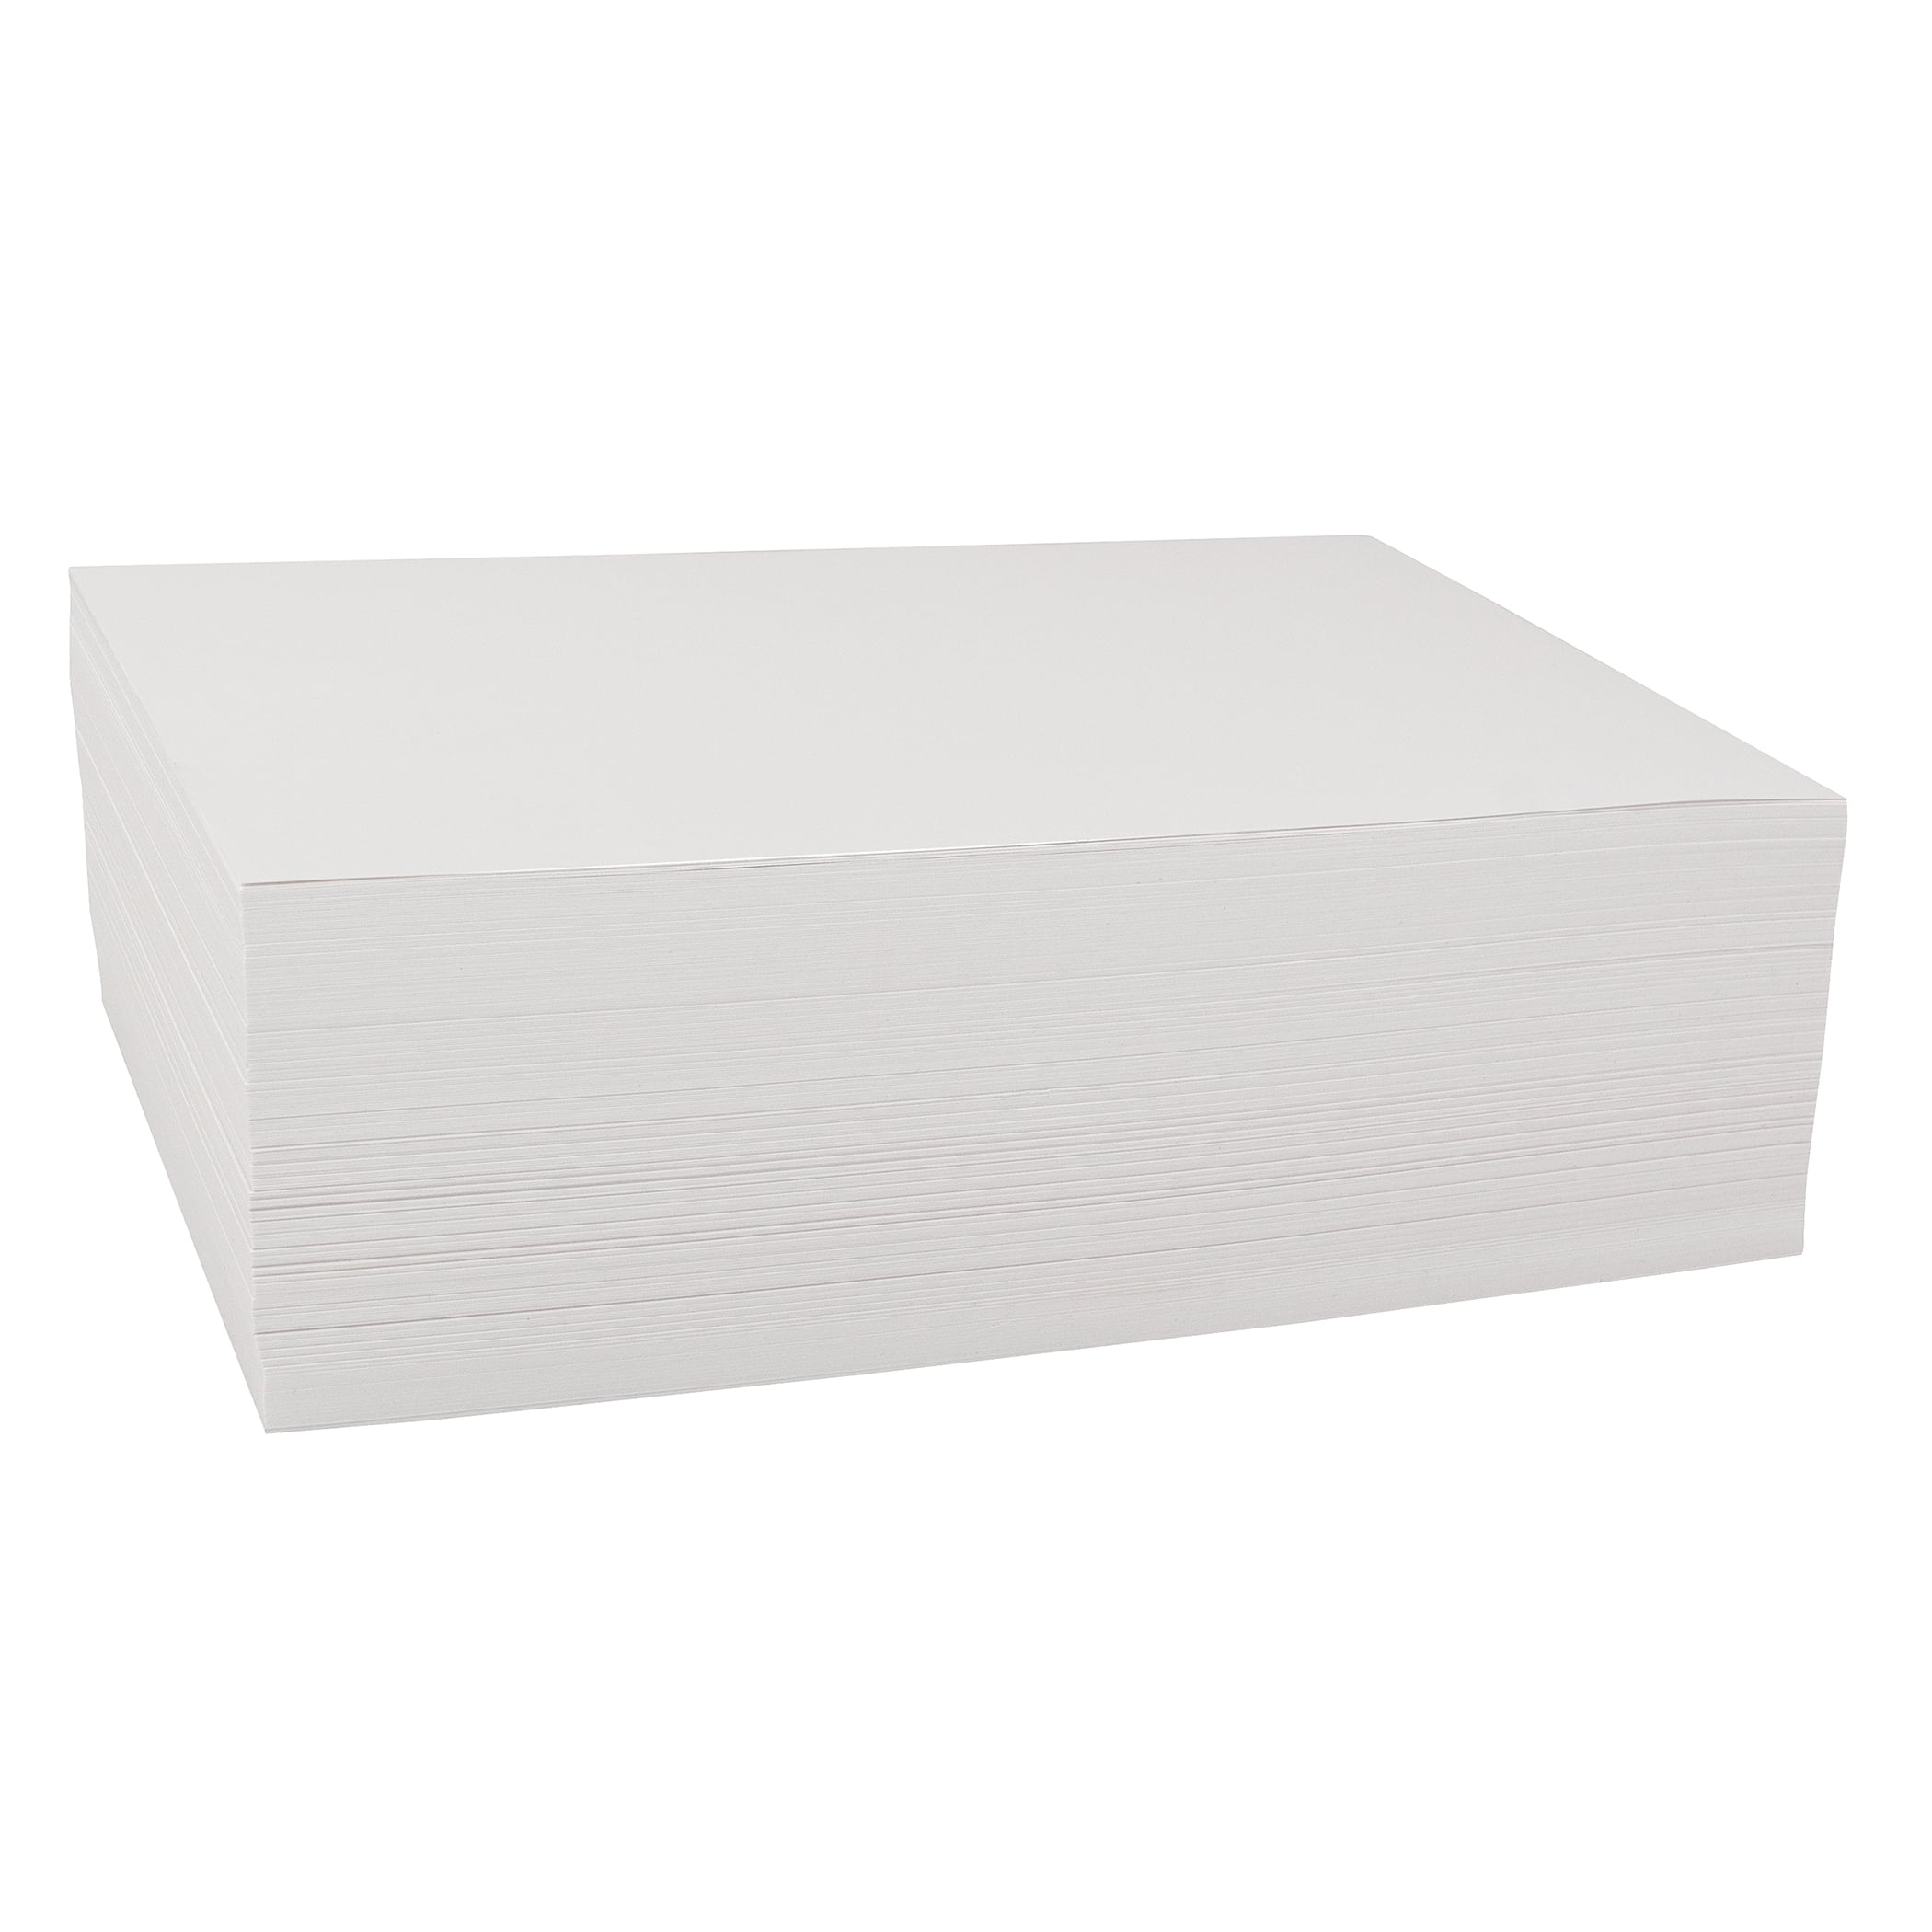 Pacon 4748 White Drawing Paper, 47 lbs., 18 x 24, Pure White, 500  Sheets/Ream 